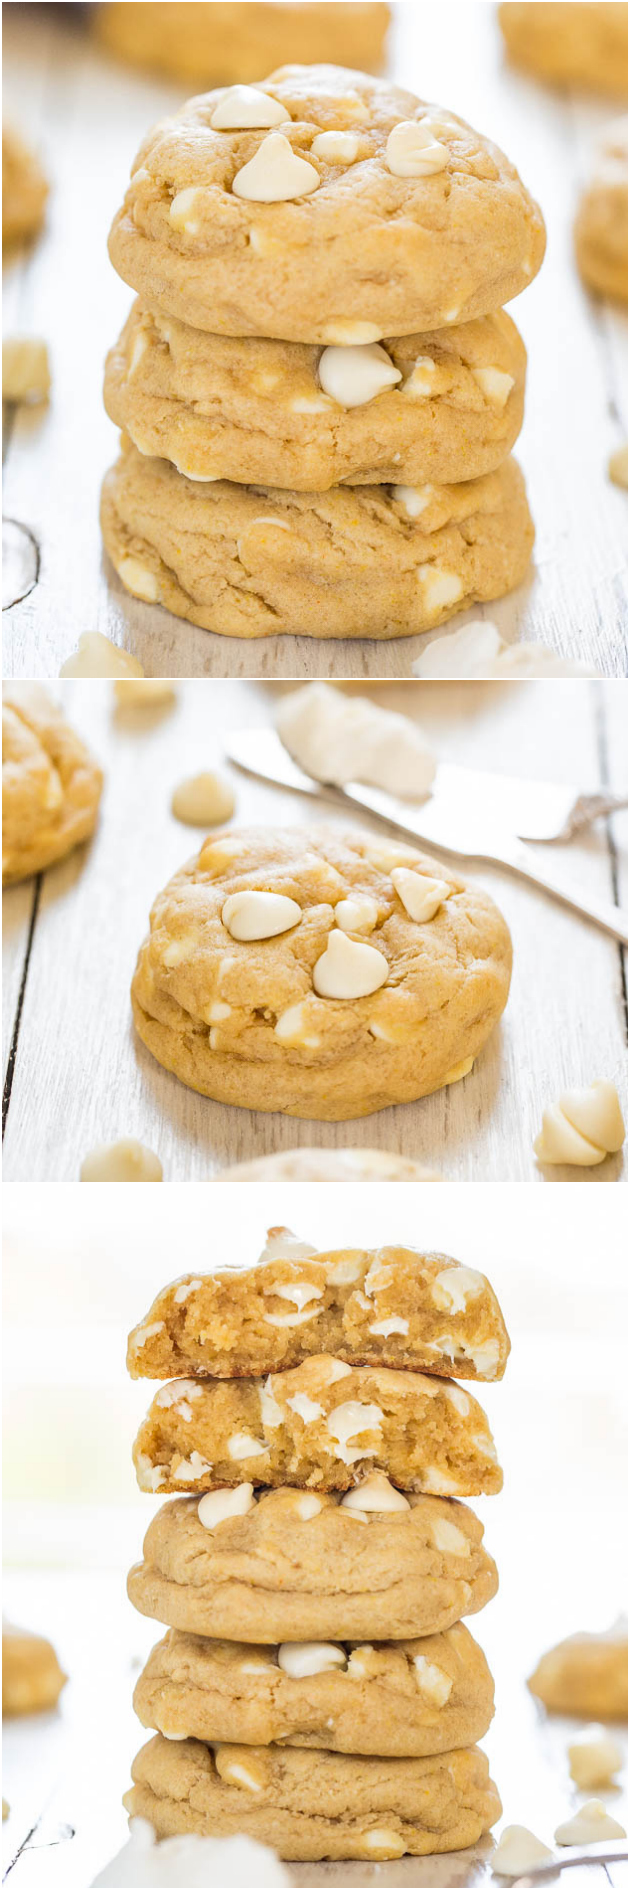 Soft and Chewy White Chocolate Cream Cheese Cookies - Move over butter, cream cheese makes these cookies thick and super soft!